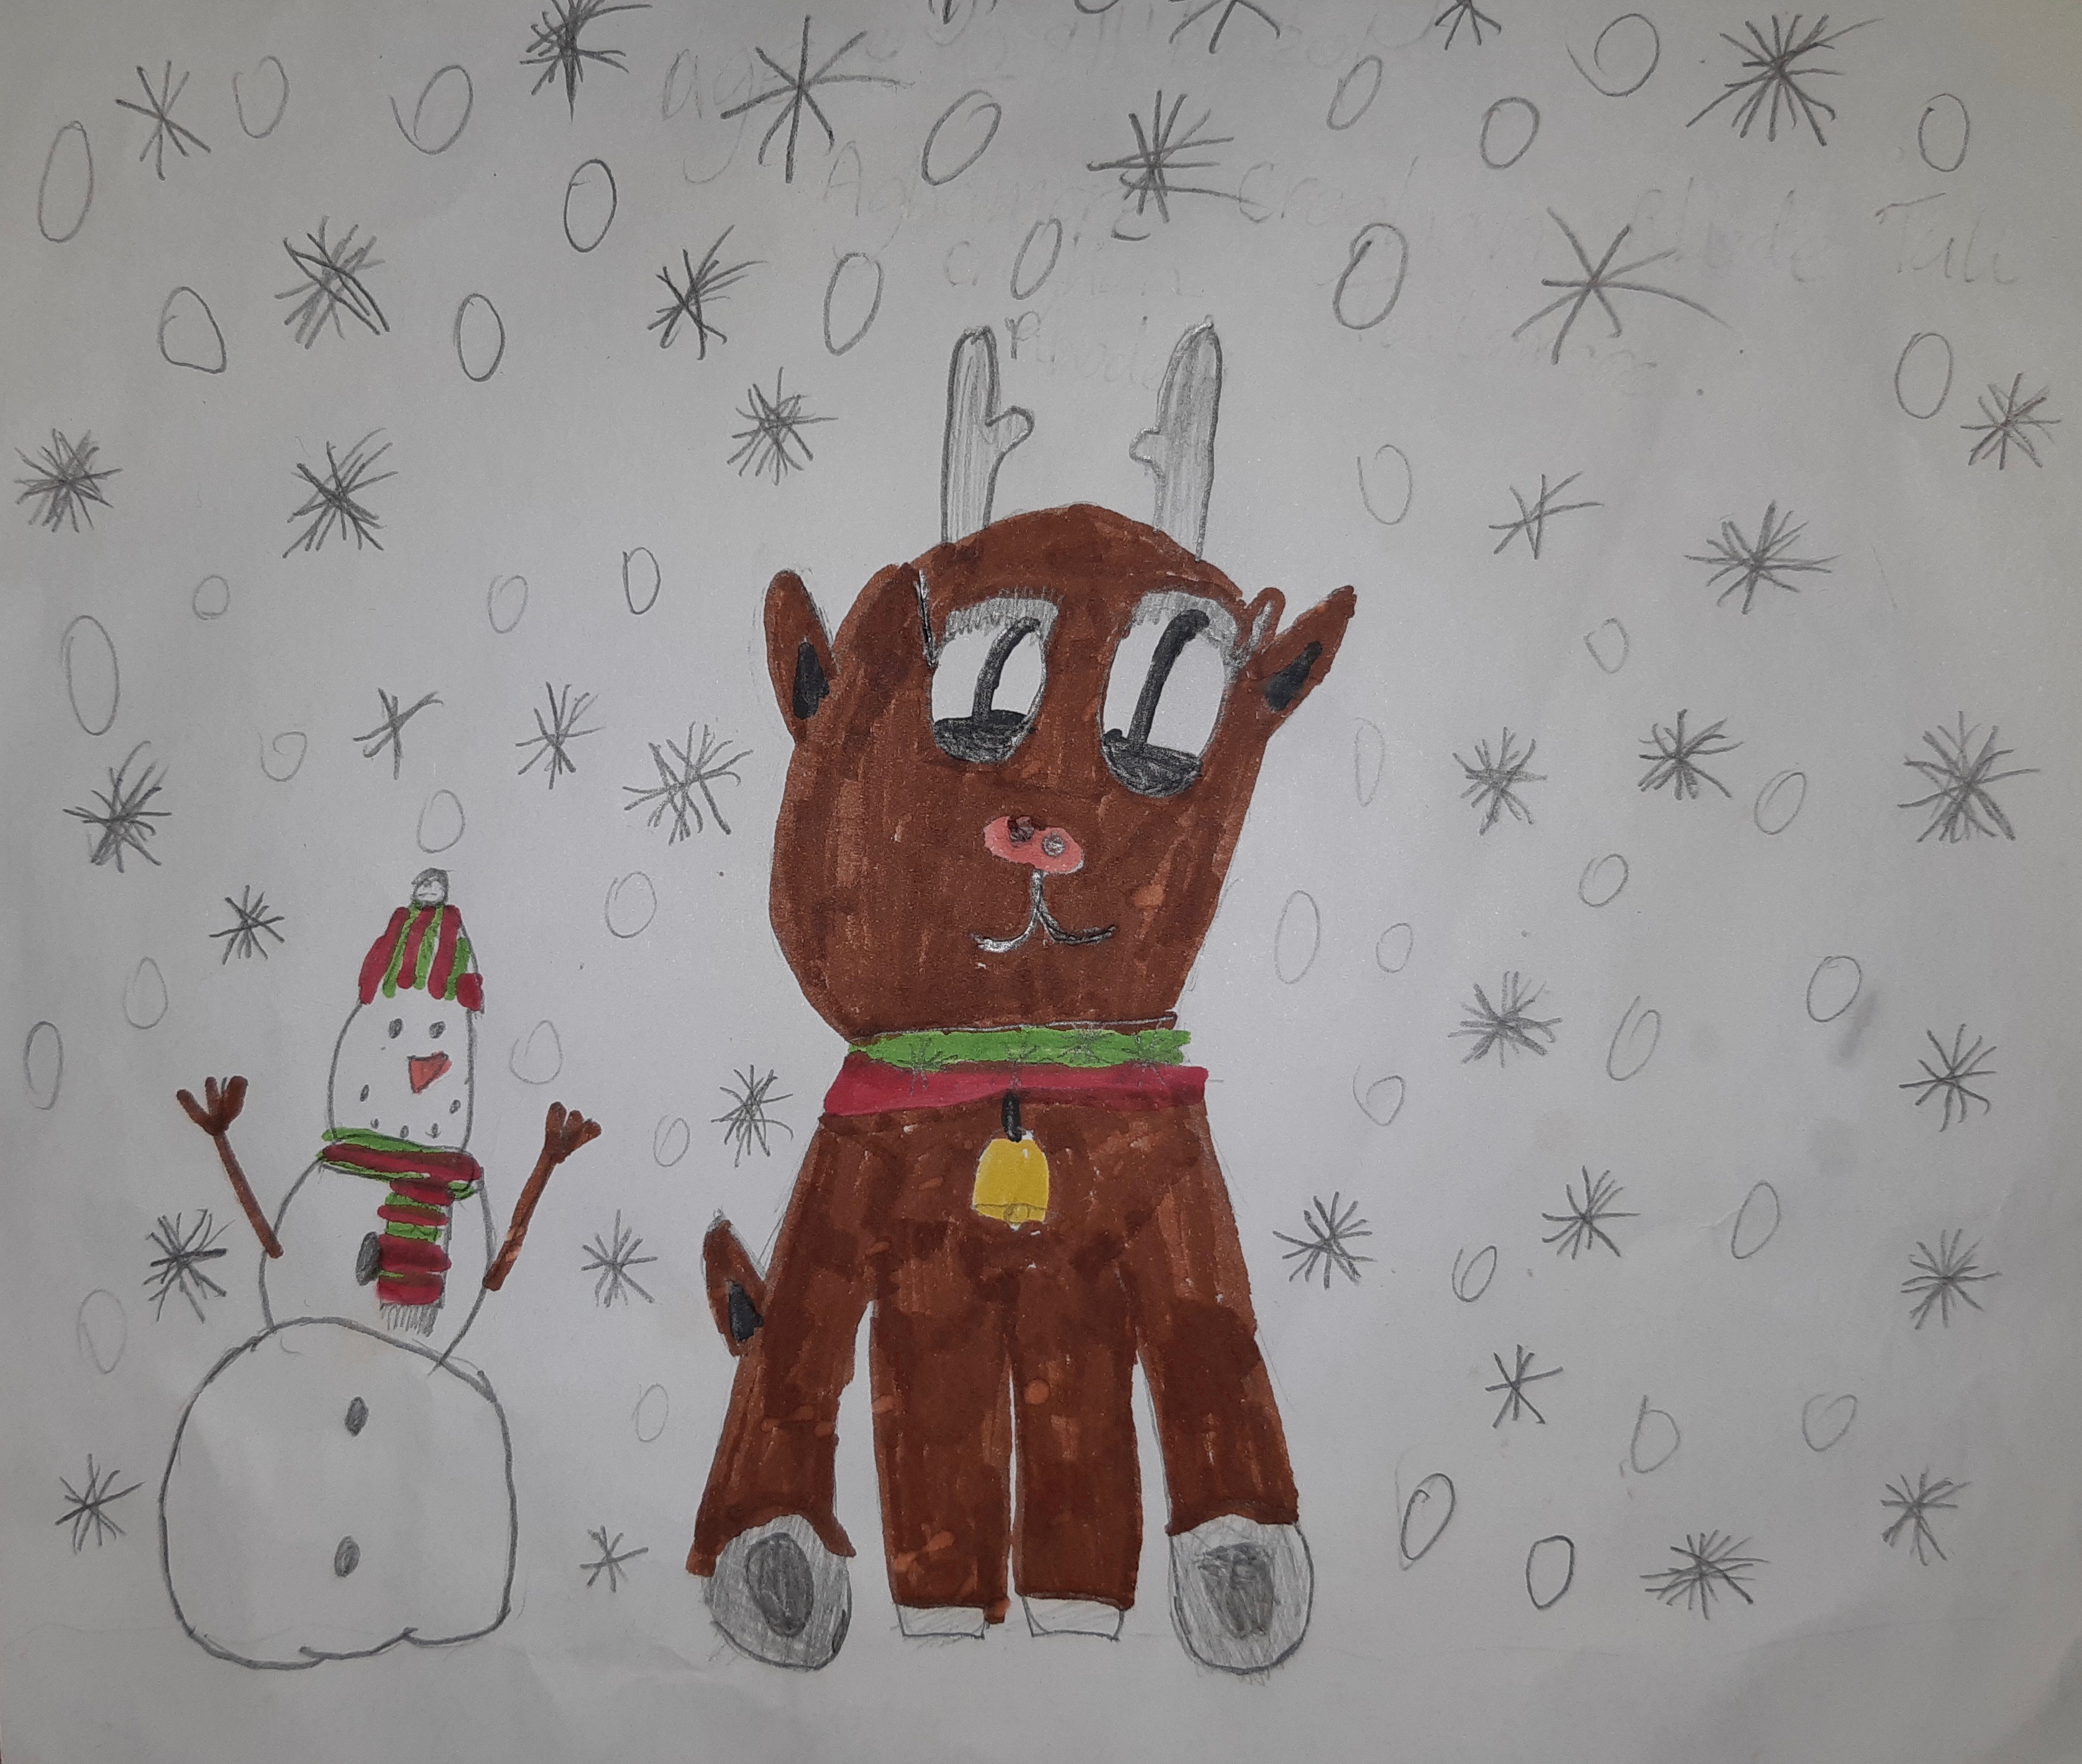 'Snowy Reindeer' by Julianne (8) from Offaly